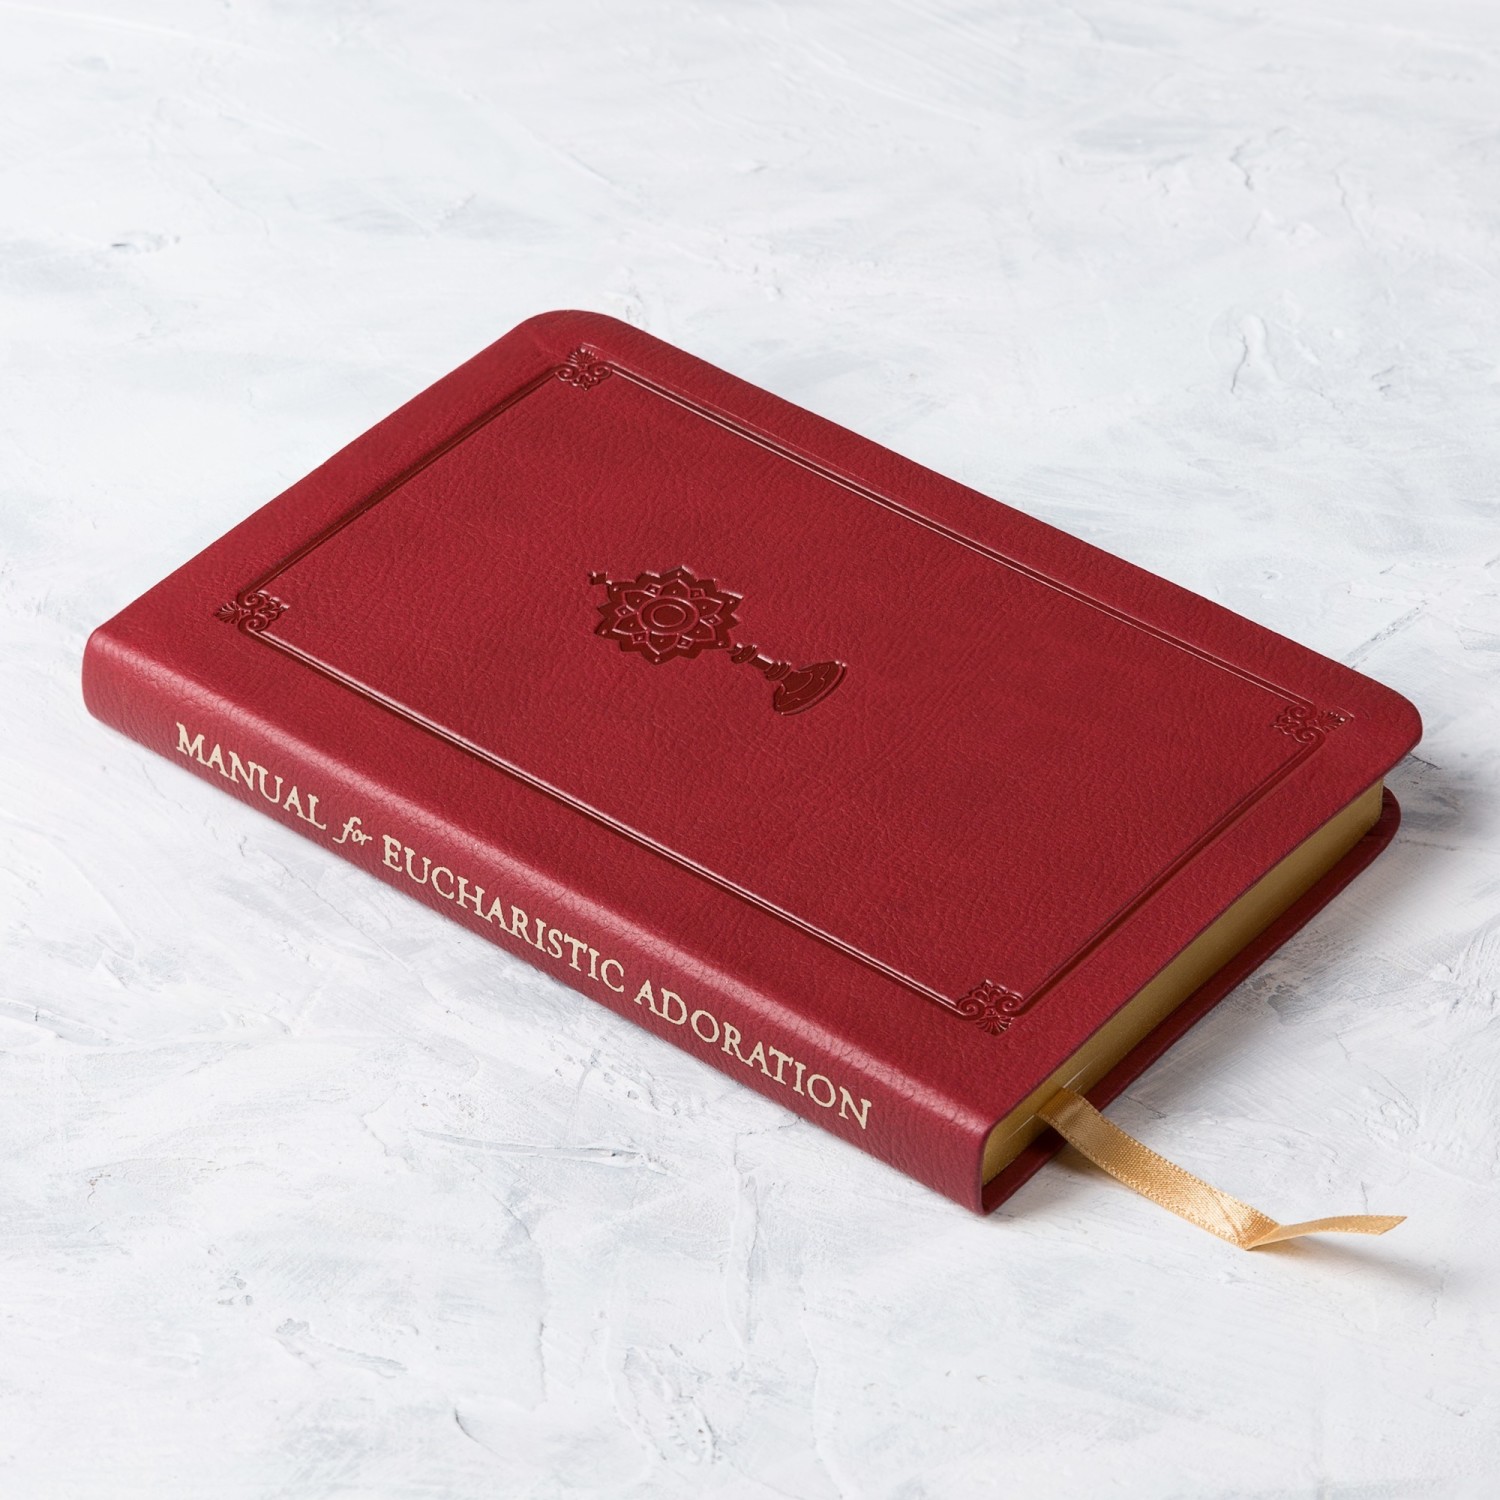 James I Love You: Valentine's Day Notebook with the Name of Your Boyfriend.  Ruled Journal with 100 pages.